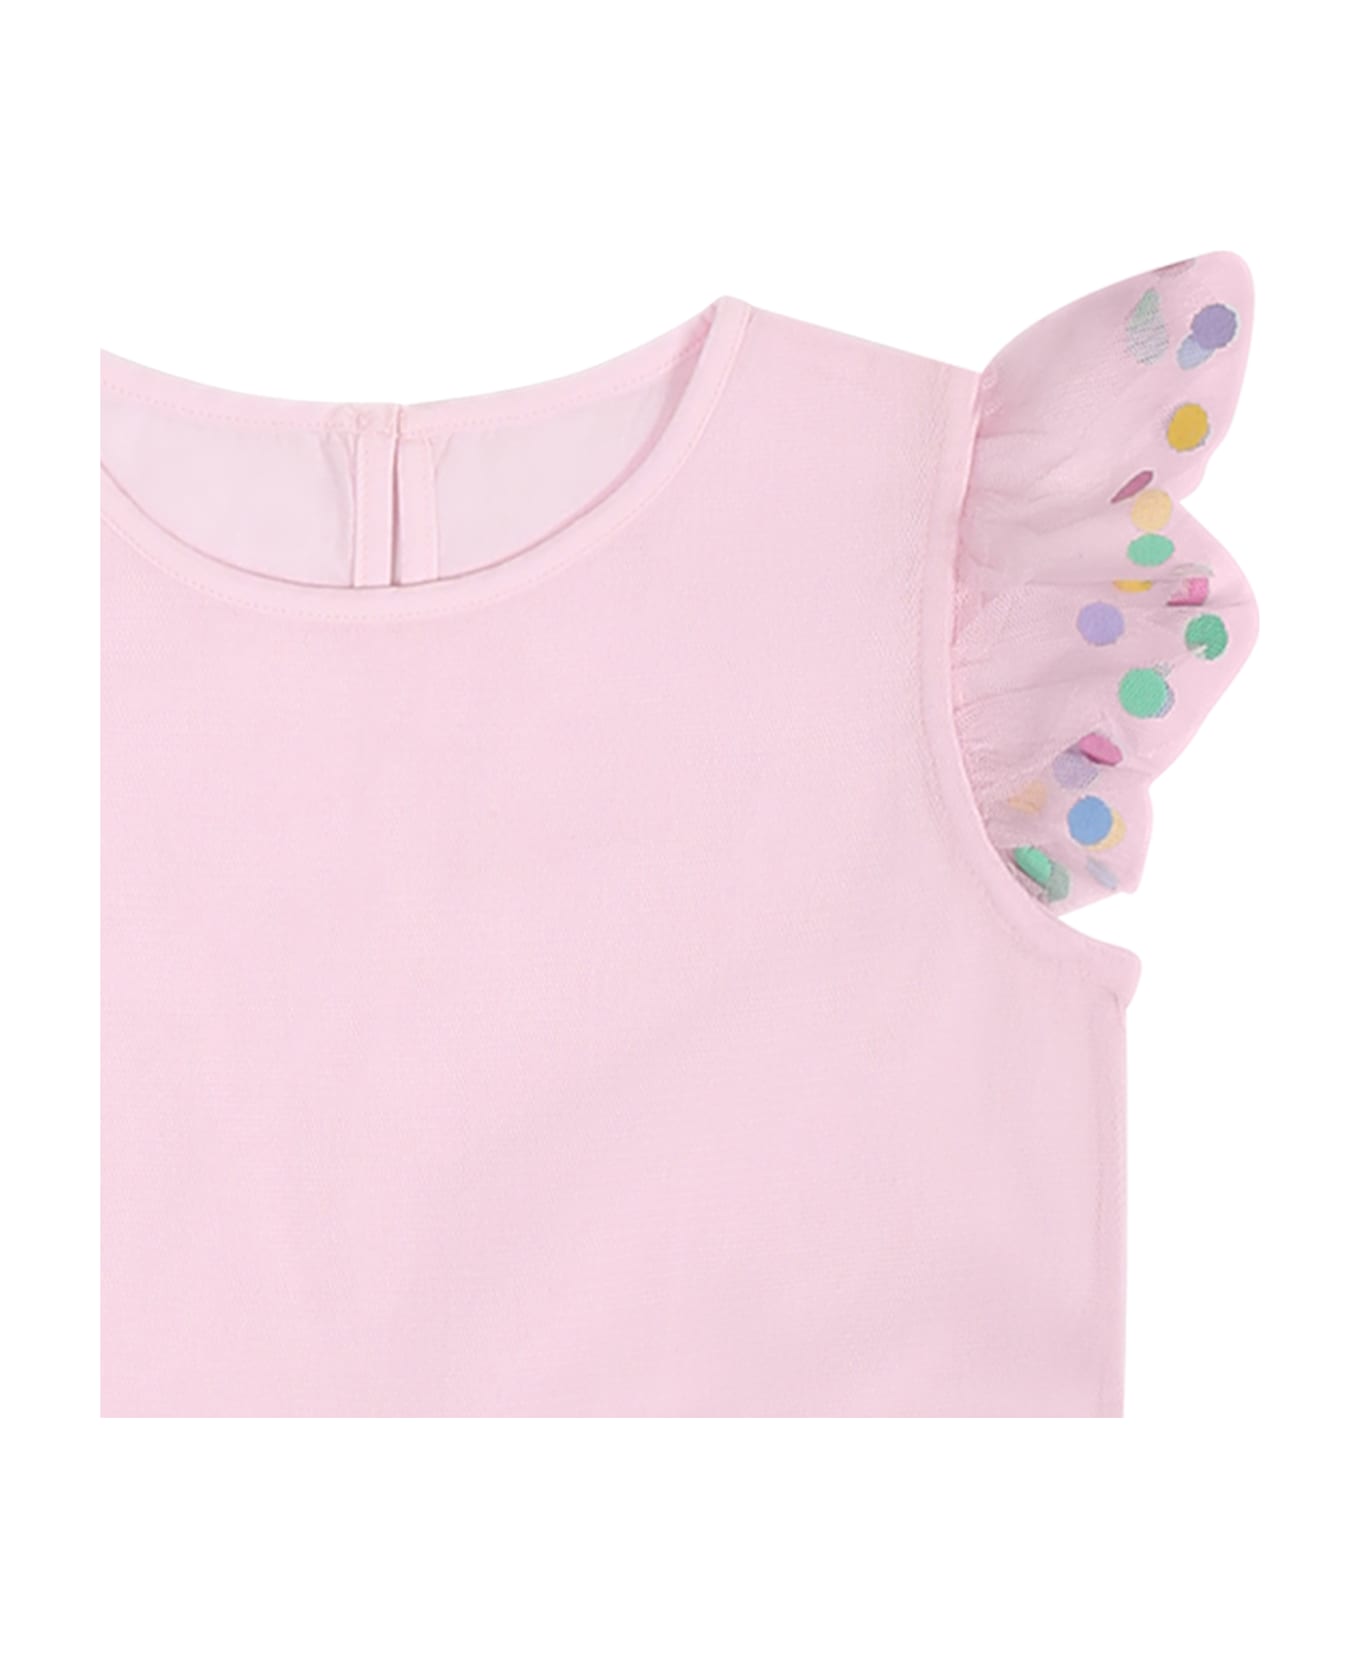 Stella McCartney Kids Pink Dress For Baby Girl With Polka Dots - Pink